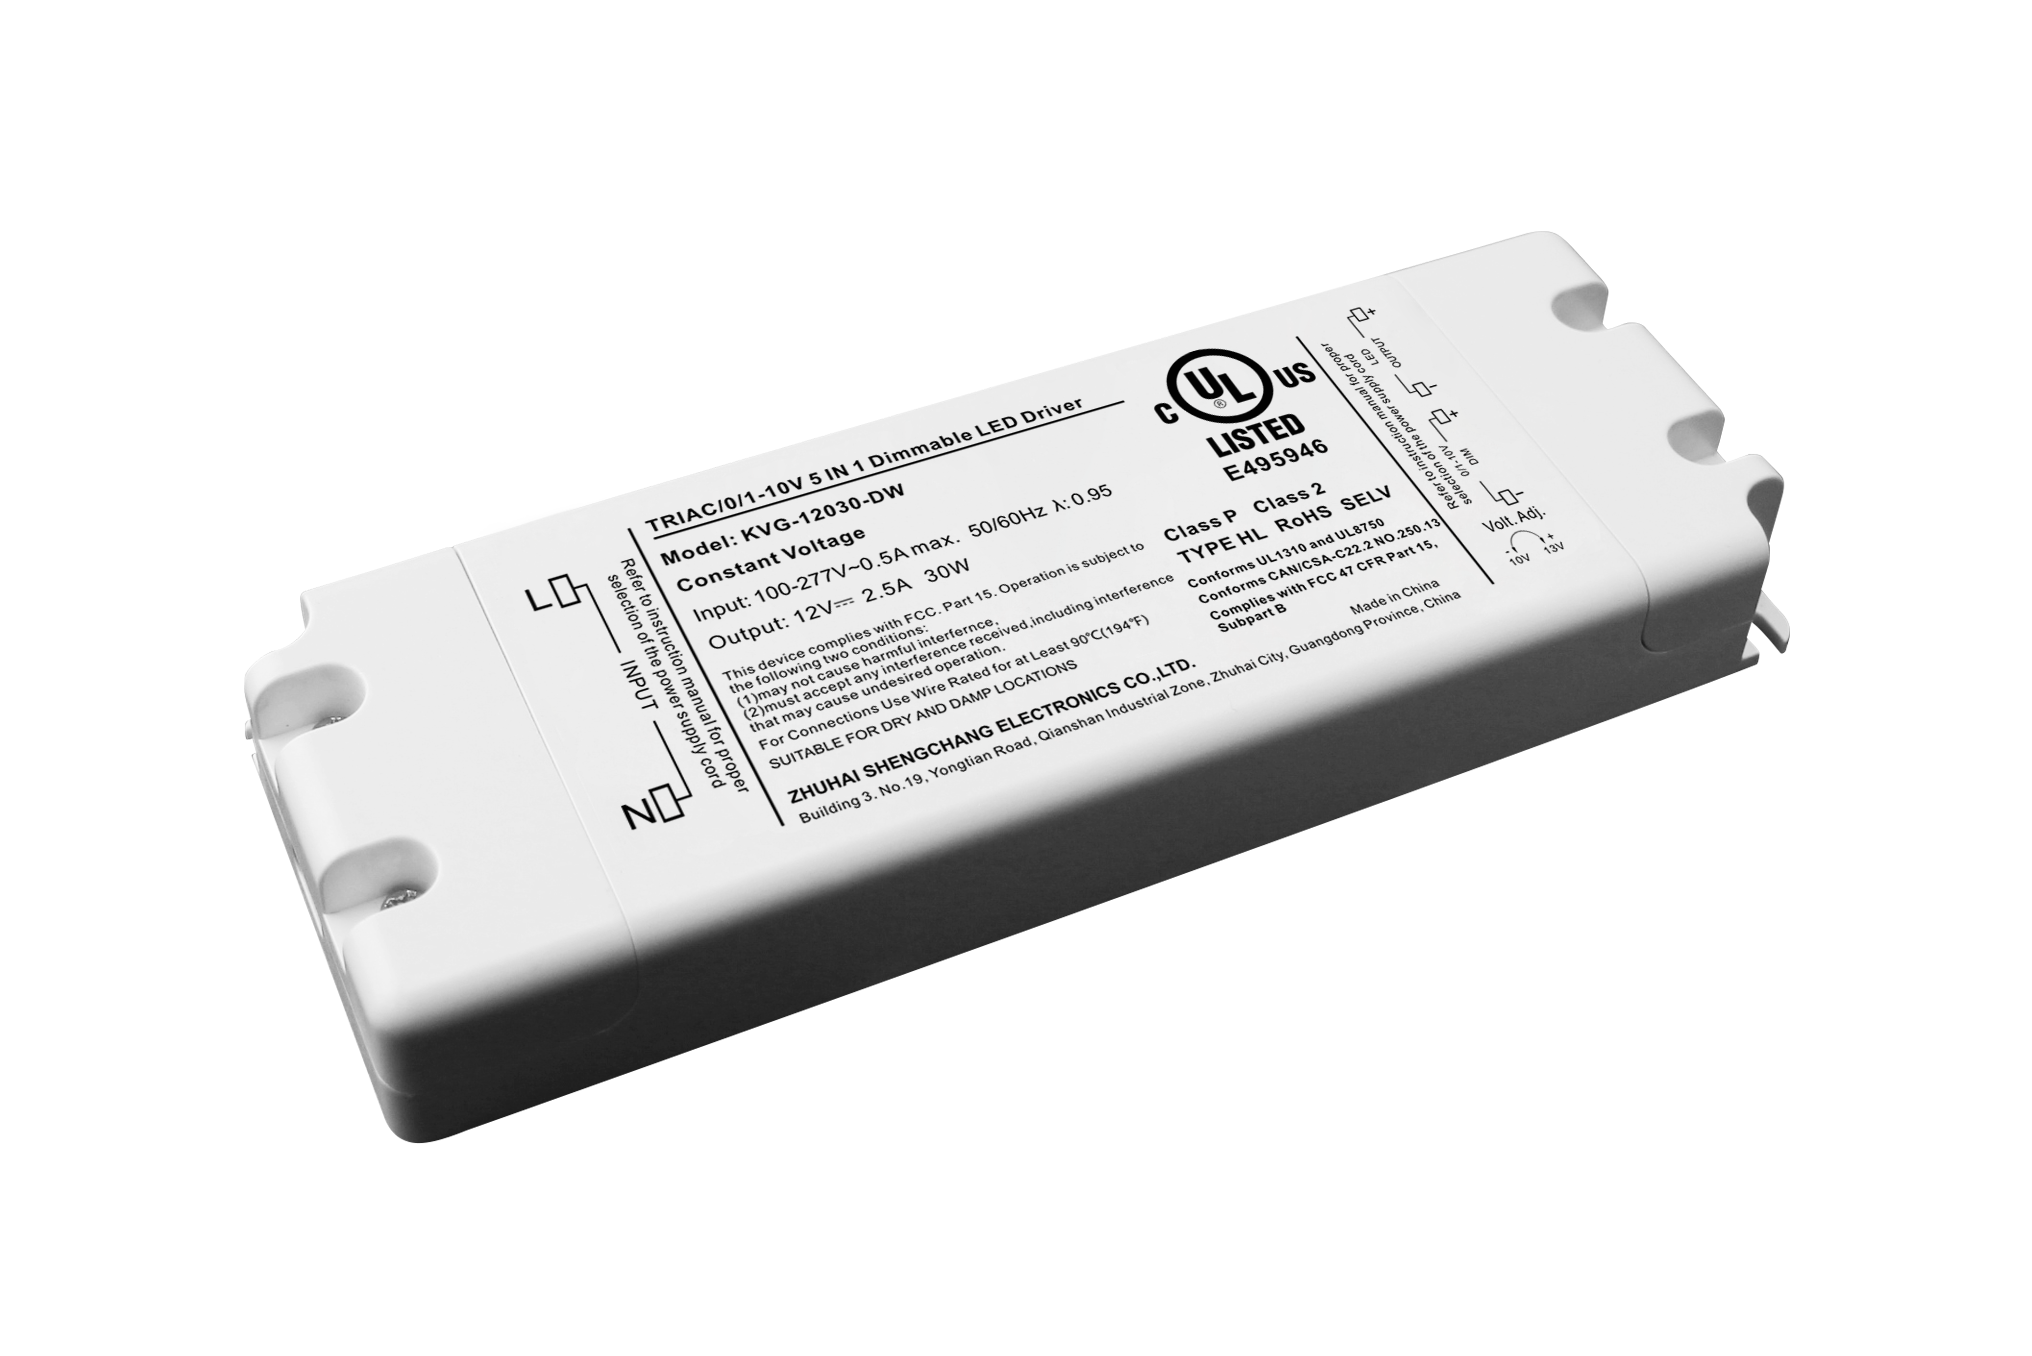 KVG-DW Series 30W Constant Voltage Triac&0/1-10V Dimmable LED driver